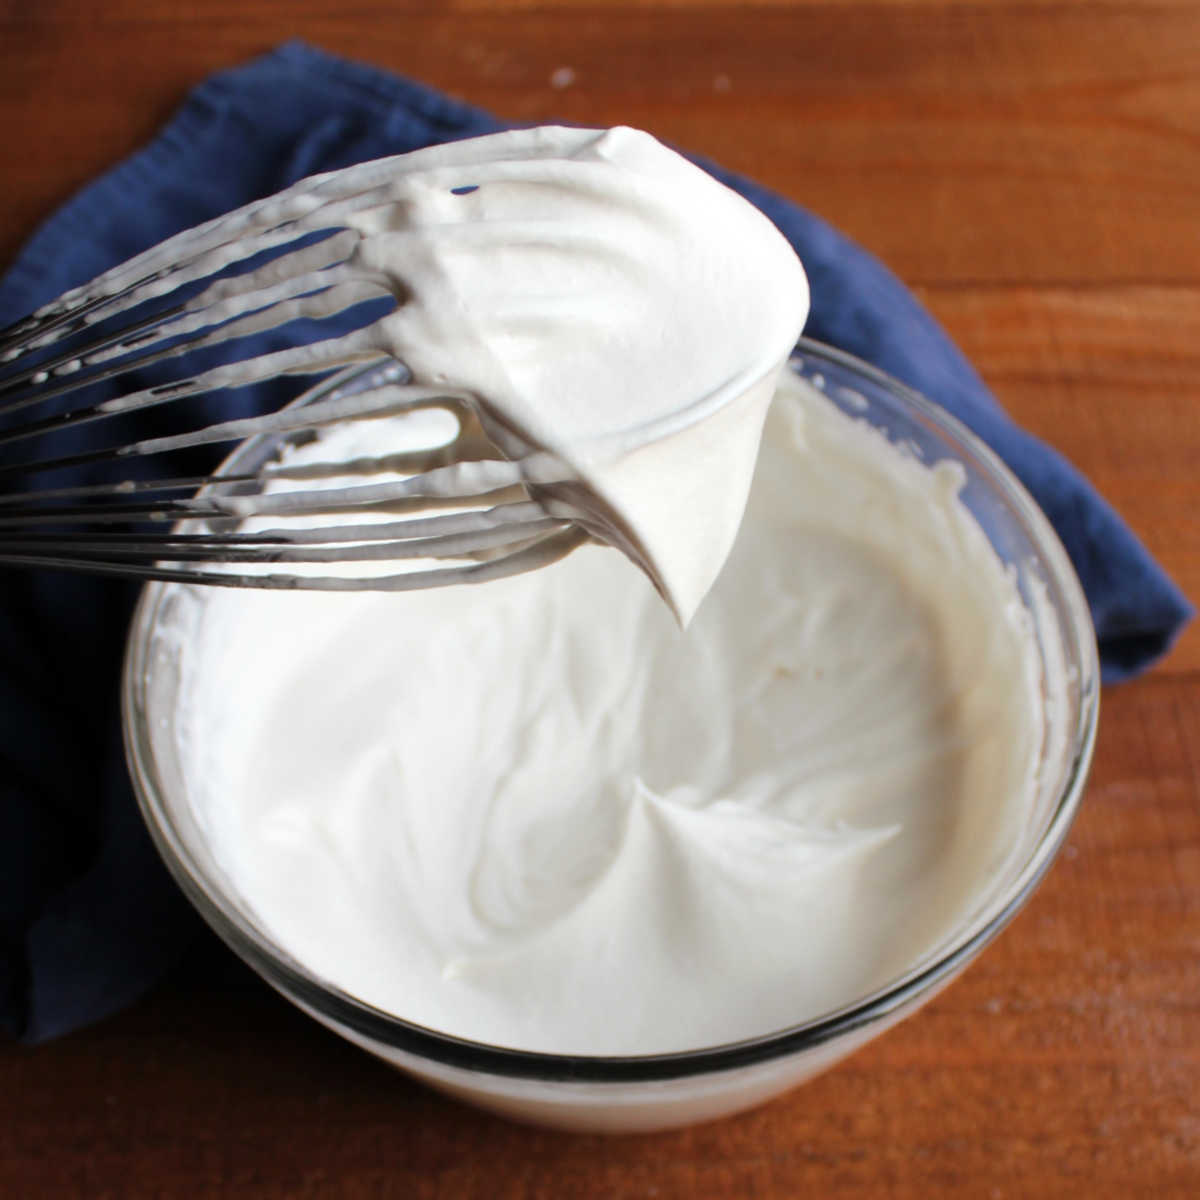 whisk2Bfilled2Bwith2Bmaple2Bwhipped2Bcream